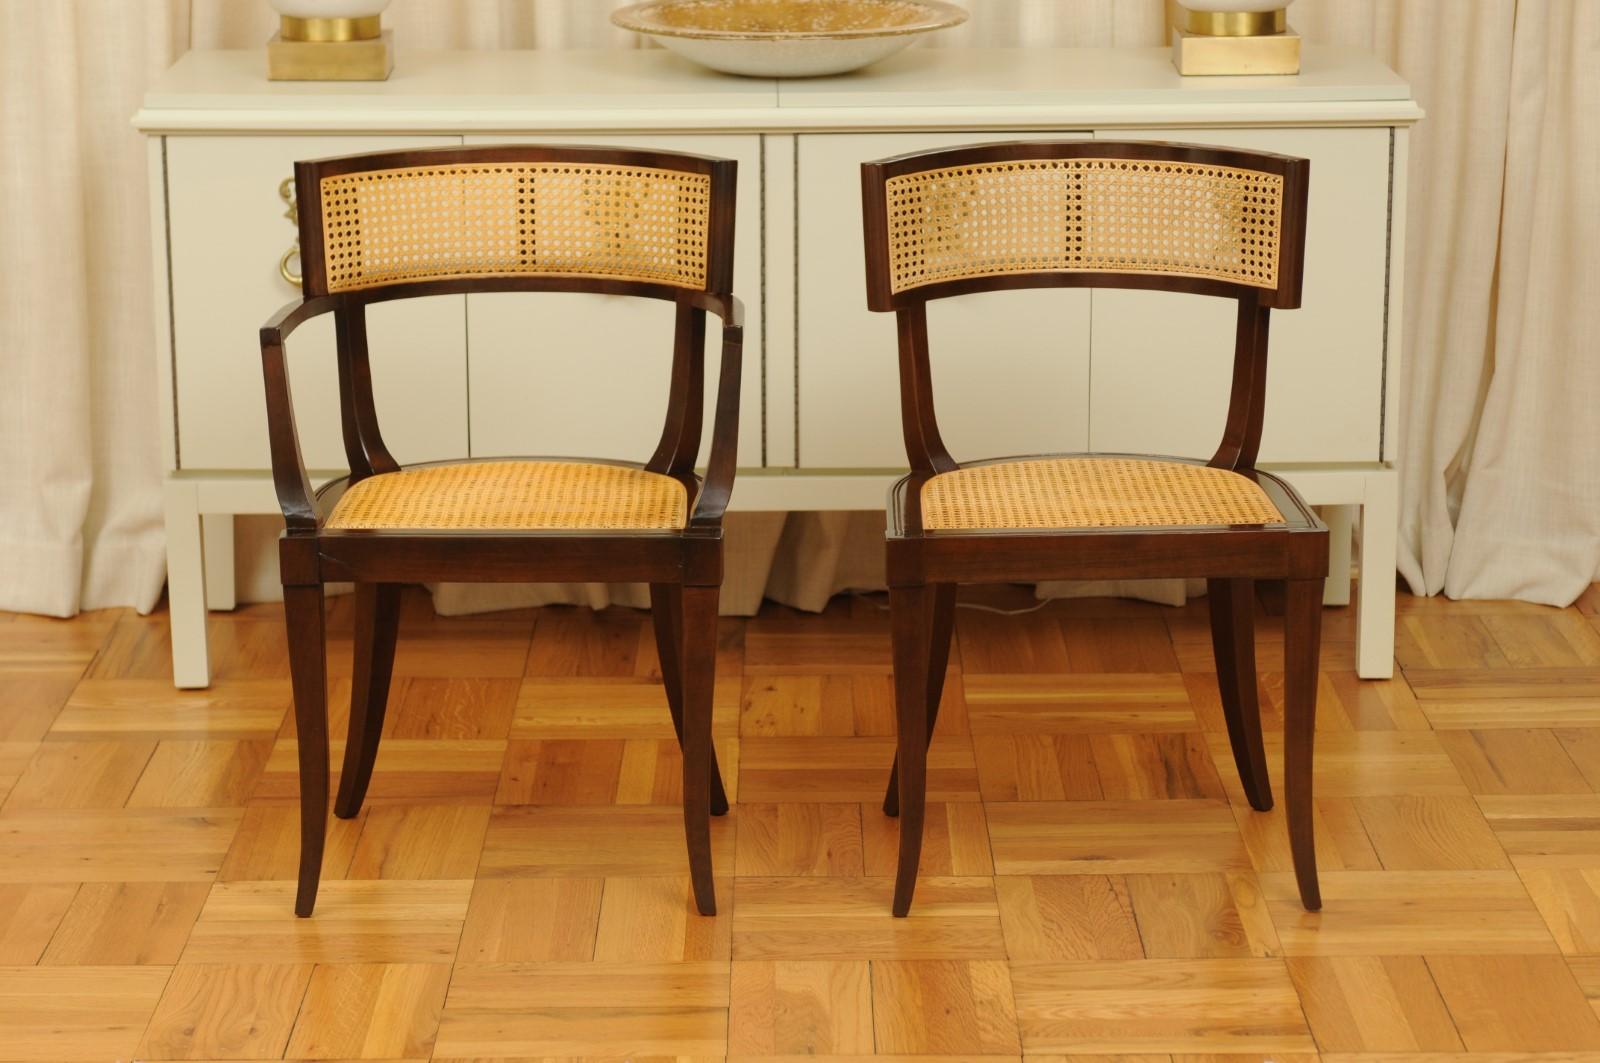 Mid-20th Century Exquisite Set of 8 Klismos Cane Dining Chairs by Baker, circa 1958, Cane Seats For Sale